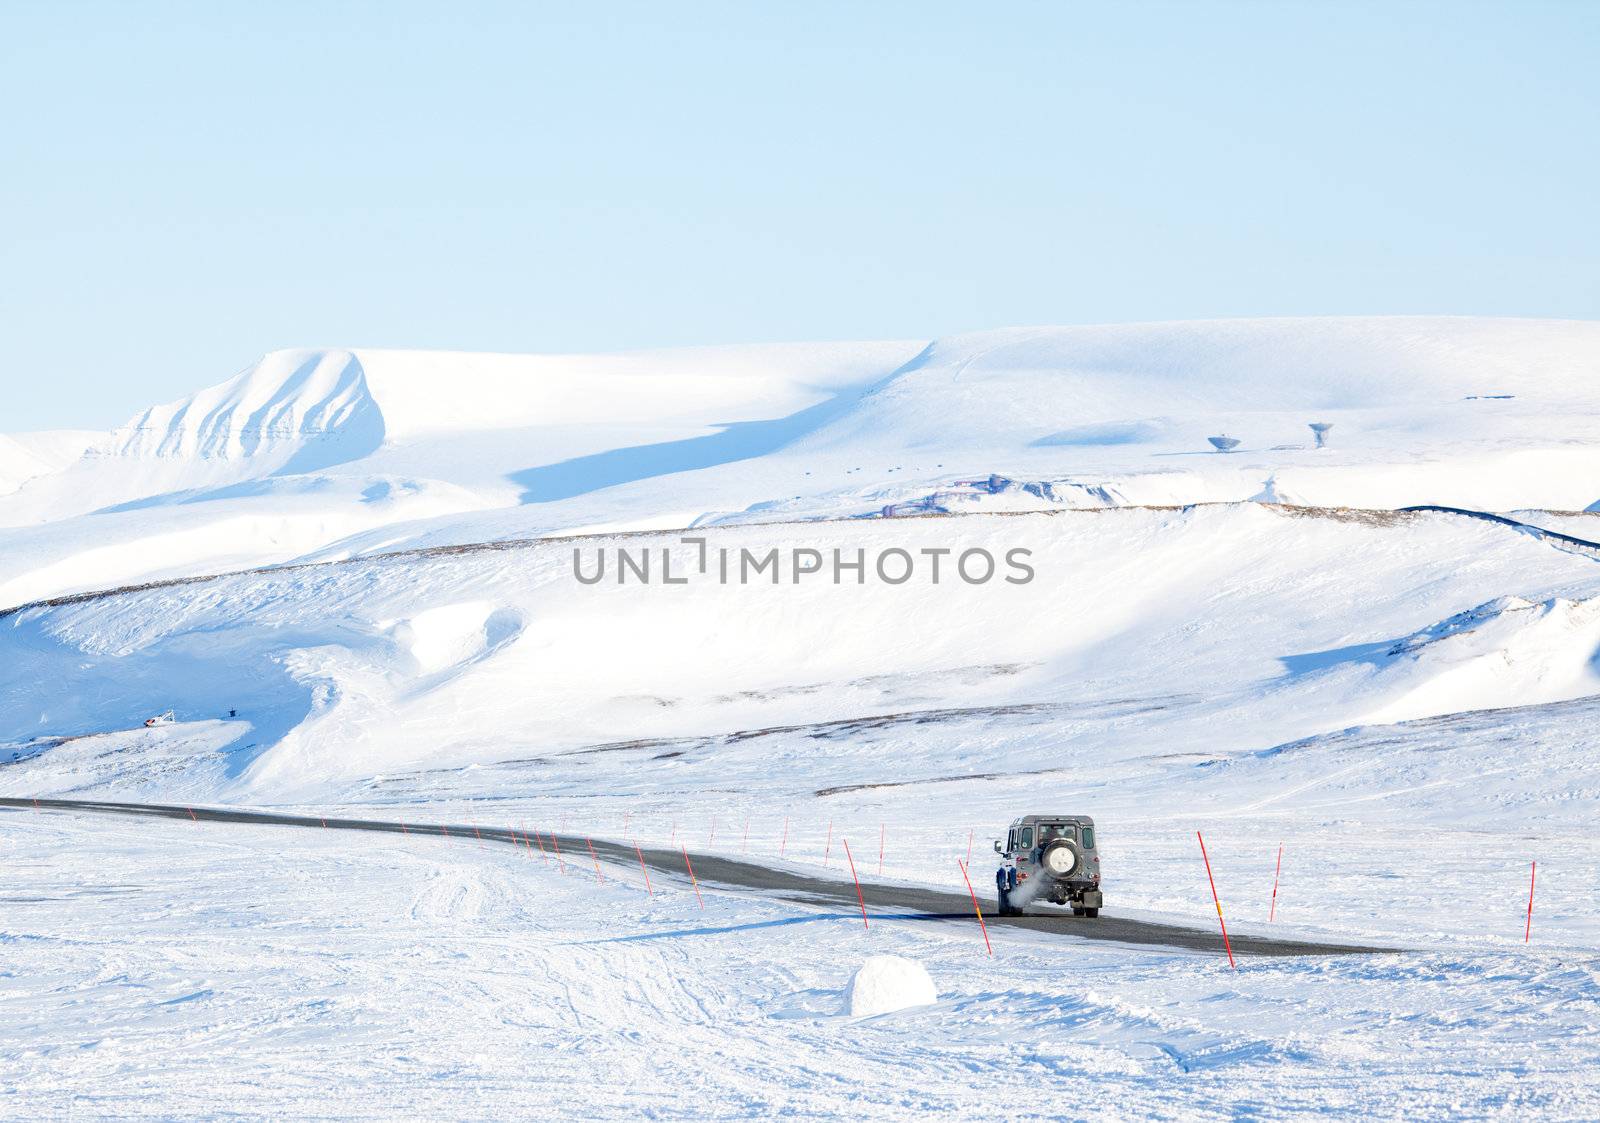 A truck driving on a barren landscape of snow and ice - Svalbard, Norway